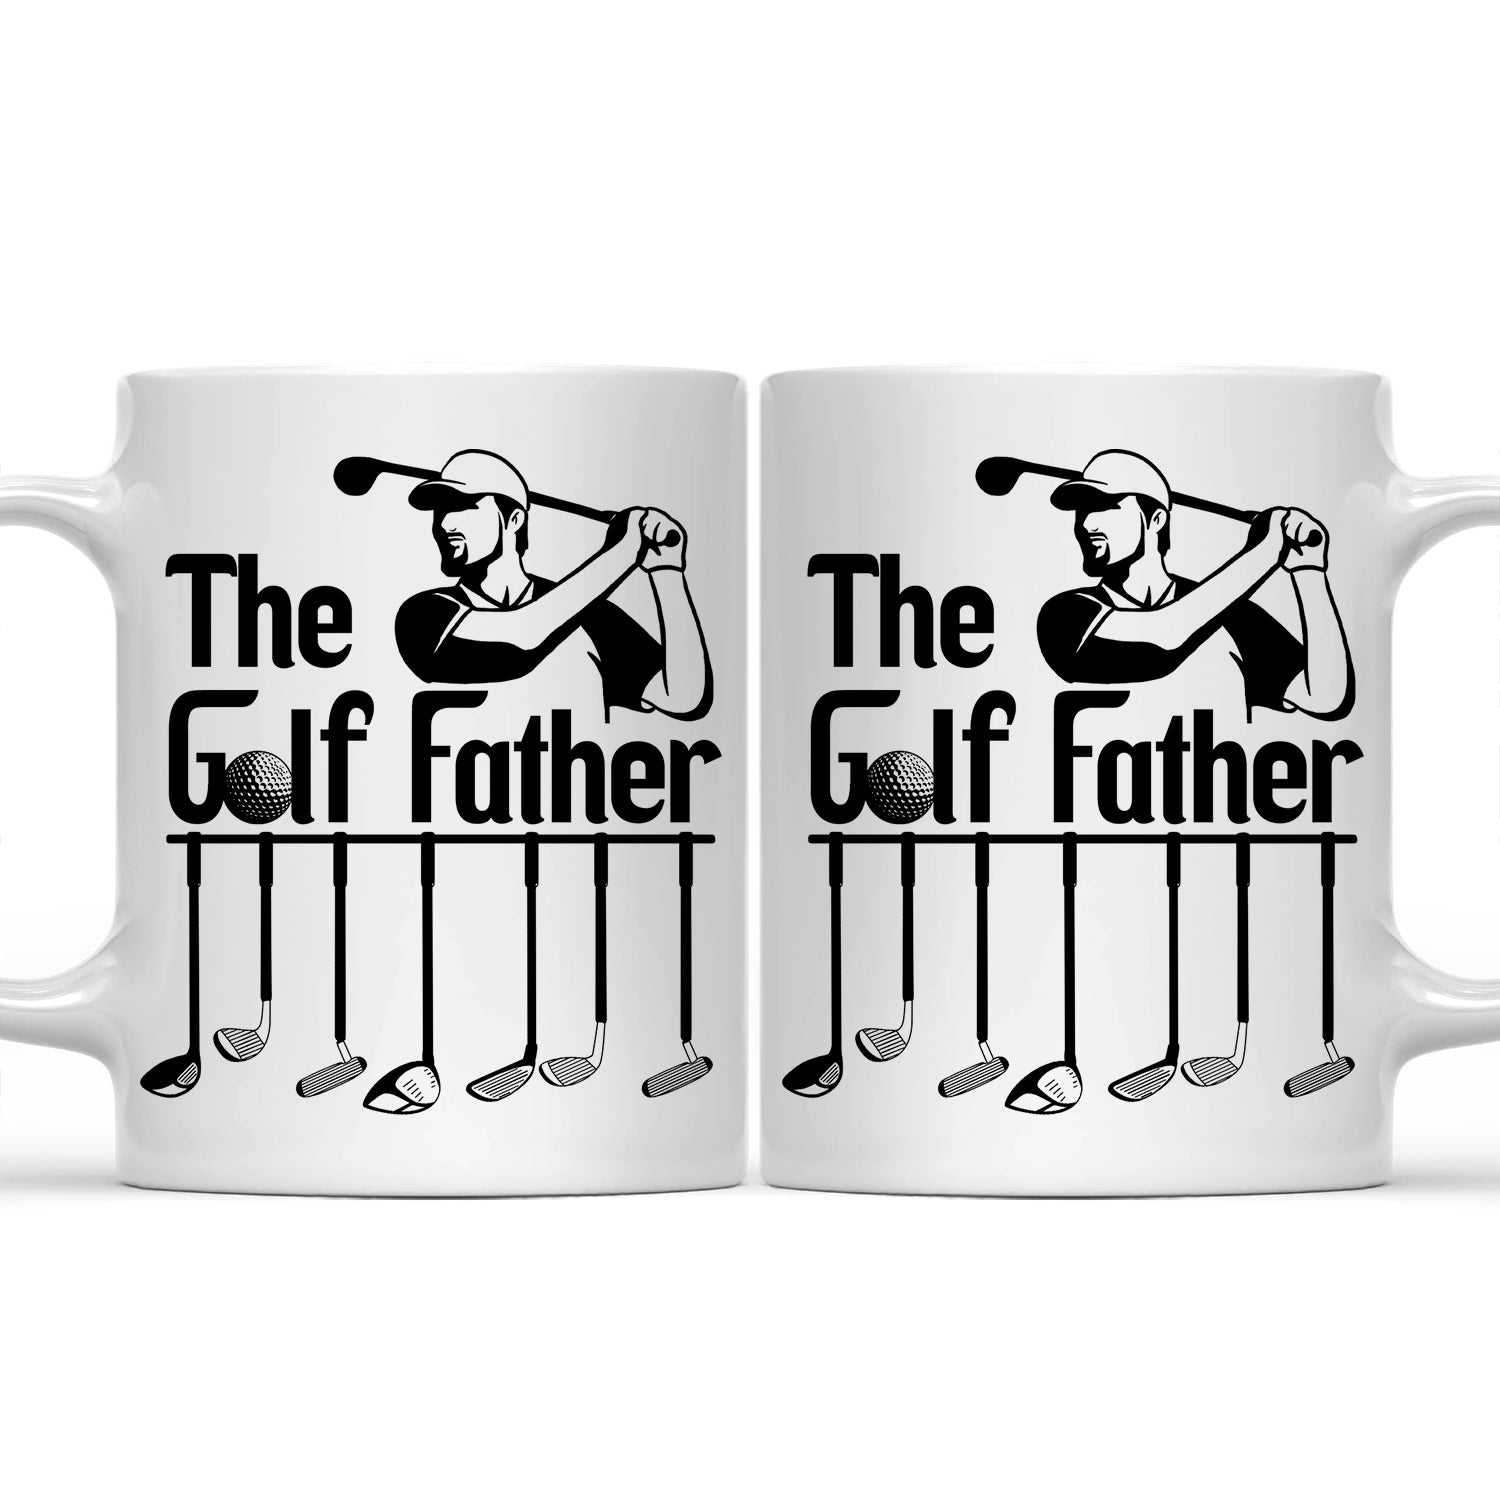 Gifts For Dad - Golf Gifts for Men, Funny Golf Gifts, Golf Dad Gifts, Father's Day Golf Gifts, Gifts for Golf Lovers, Golf Accessories Gifts For Golfer Men - Coffee Mug White 11oz - The Golf Father